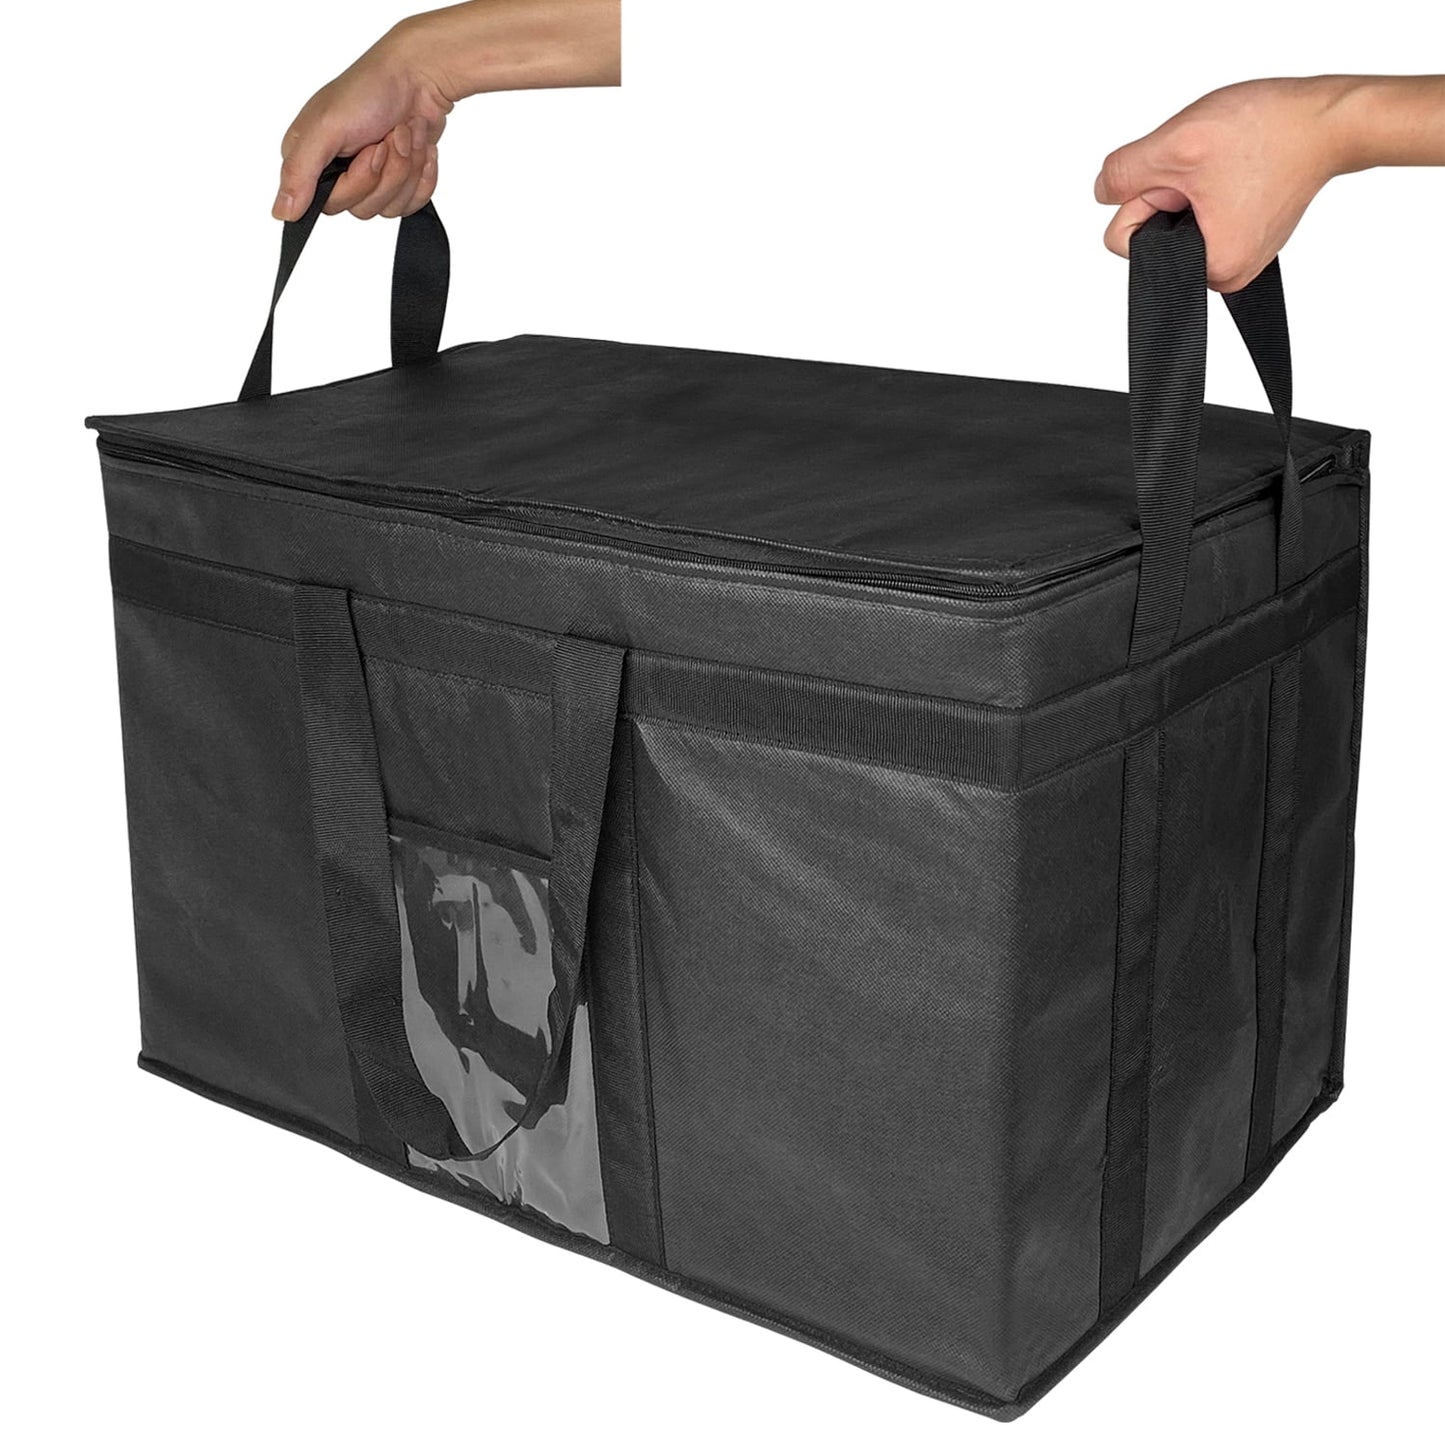 Yalin XXXL Insulated Bag, Food Delivery Bag with Zipper Closure, Reusable Grocery Shopping Bag Keep Food Hot or Cold, Collapsible Large Cooler Bag, 23"W x 15"H x 14"D (Black)-w